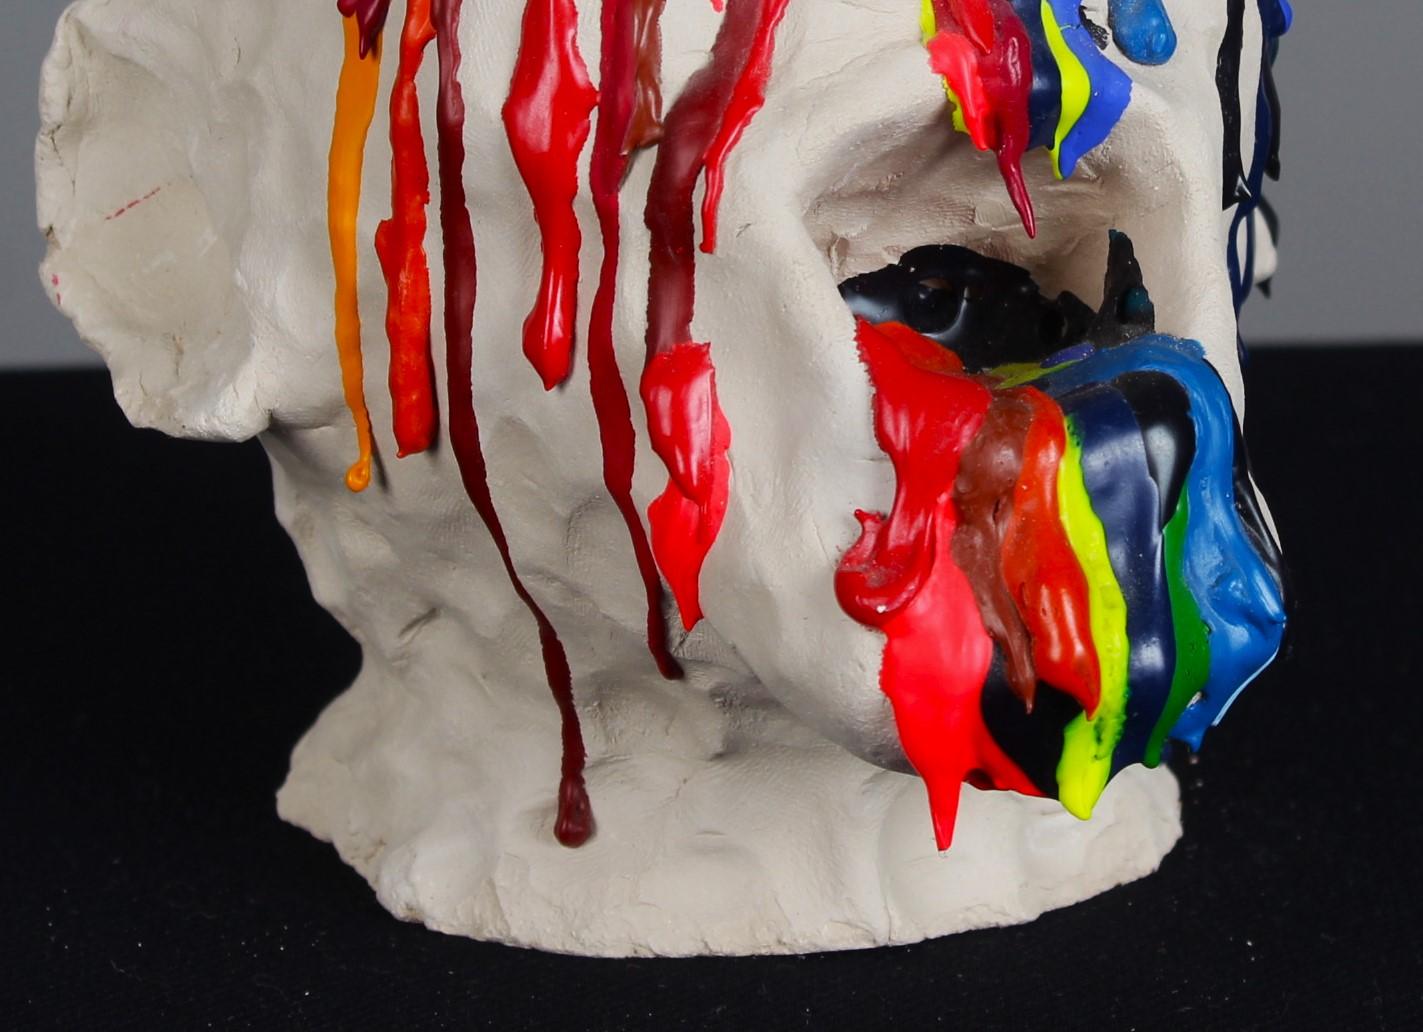 Handcrafted Sculpture of a head. 
Colourful acrylic paint is pouring down out of the eyes, nose and mouth.
Unknown Artist, 21th Century.